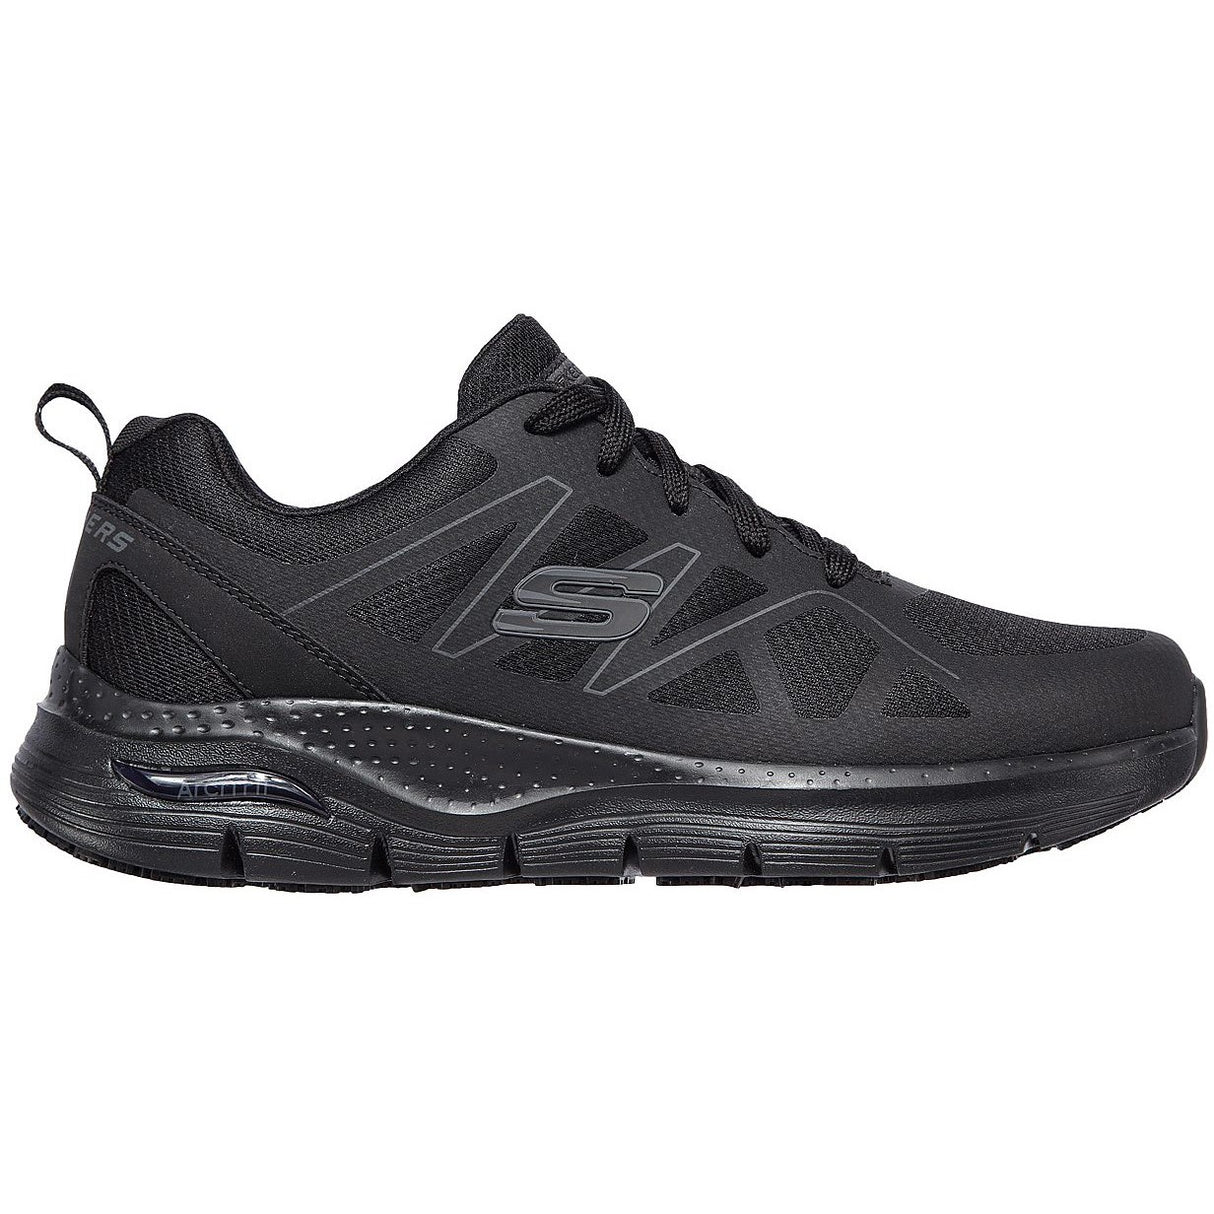 Skechers Arch Fit Slip Resistant Axtell Occupational Shoe